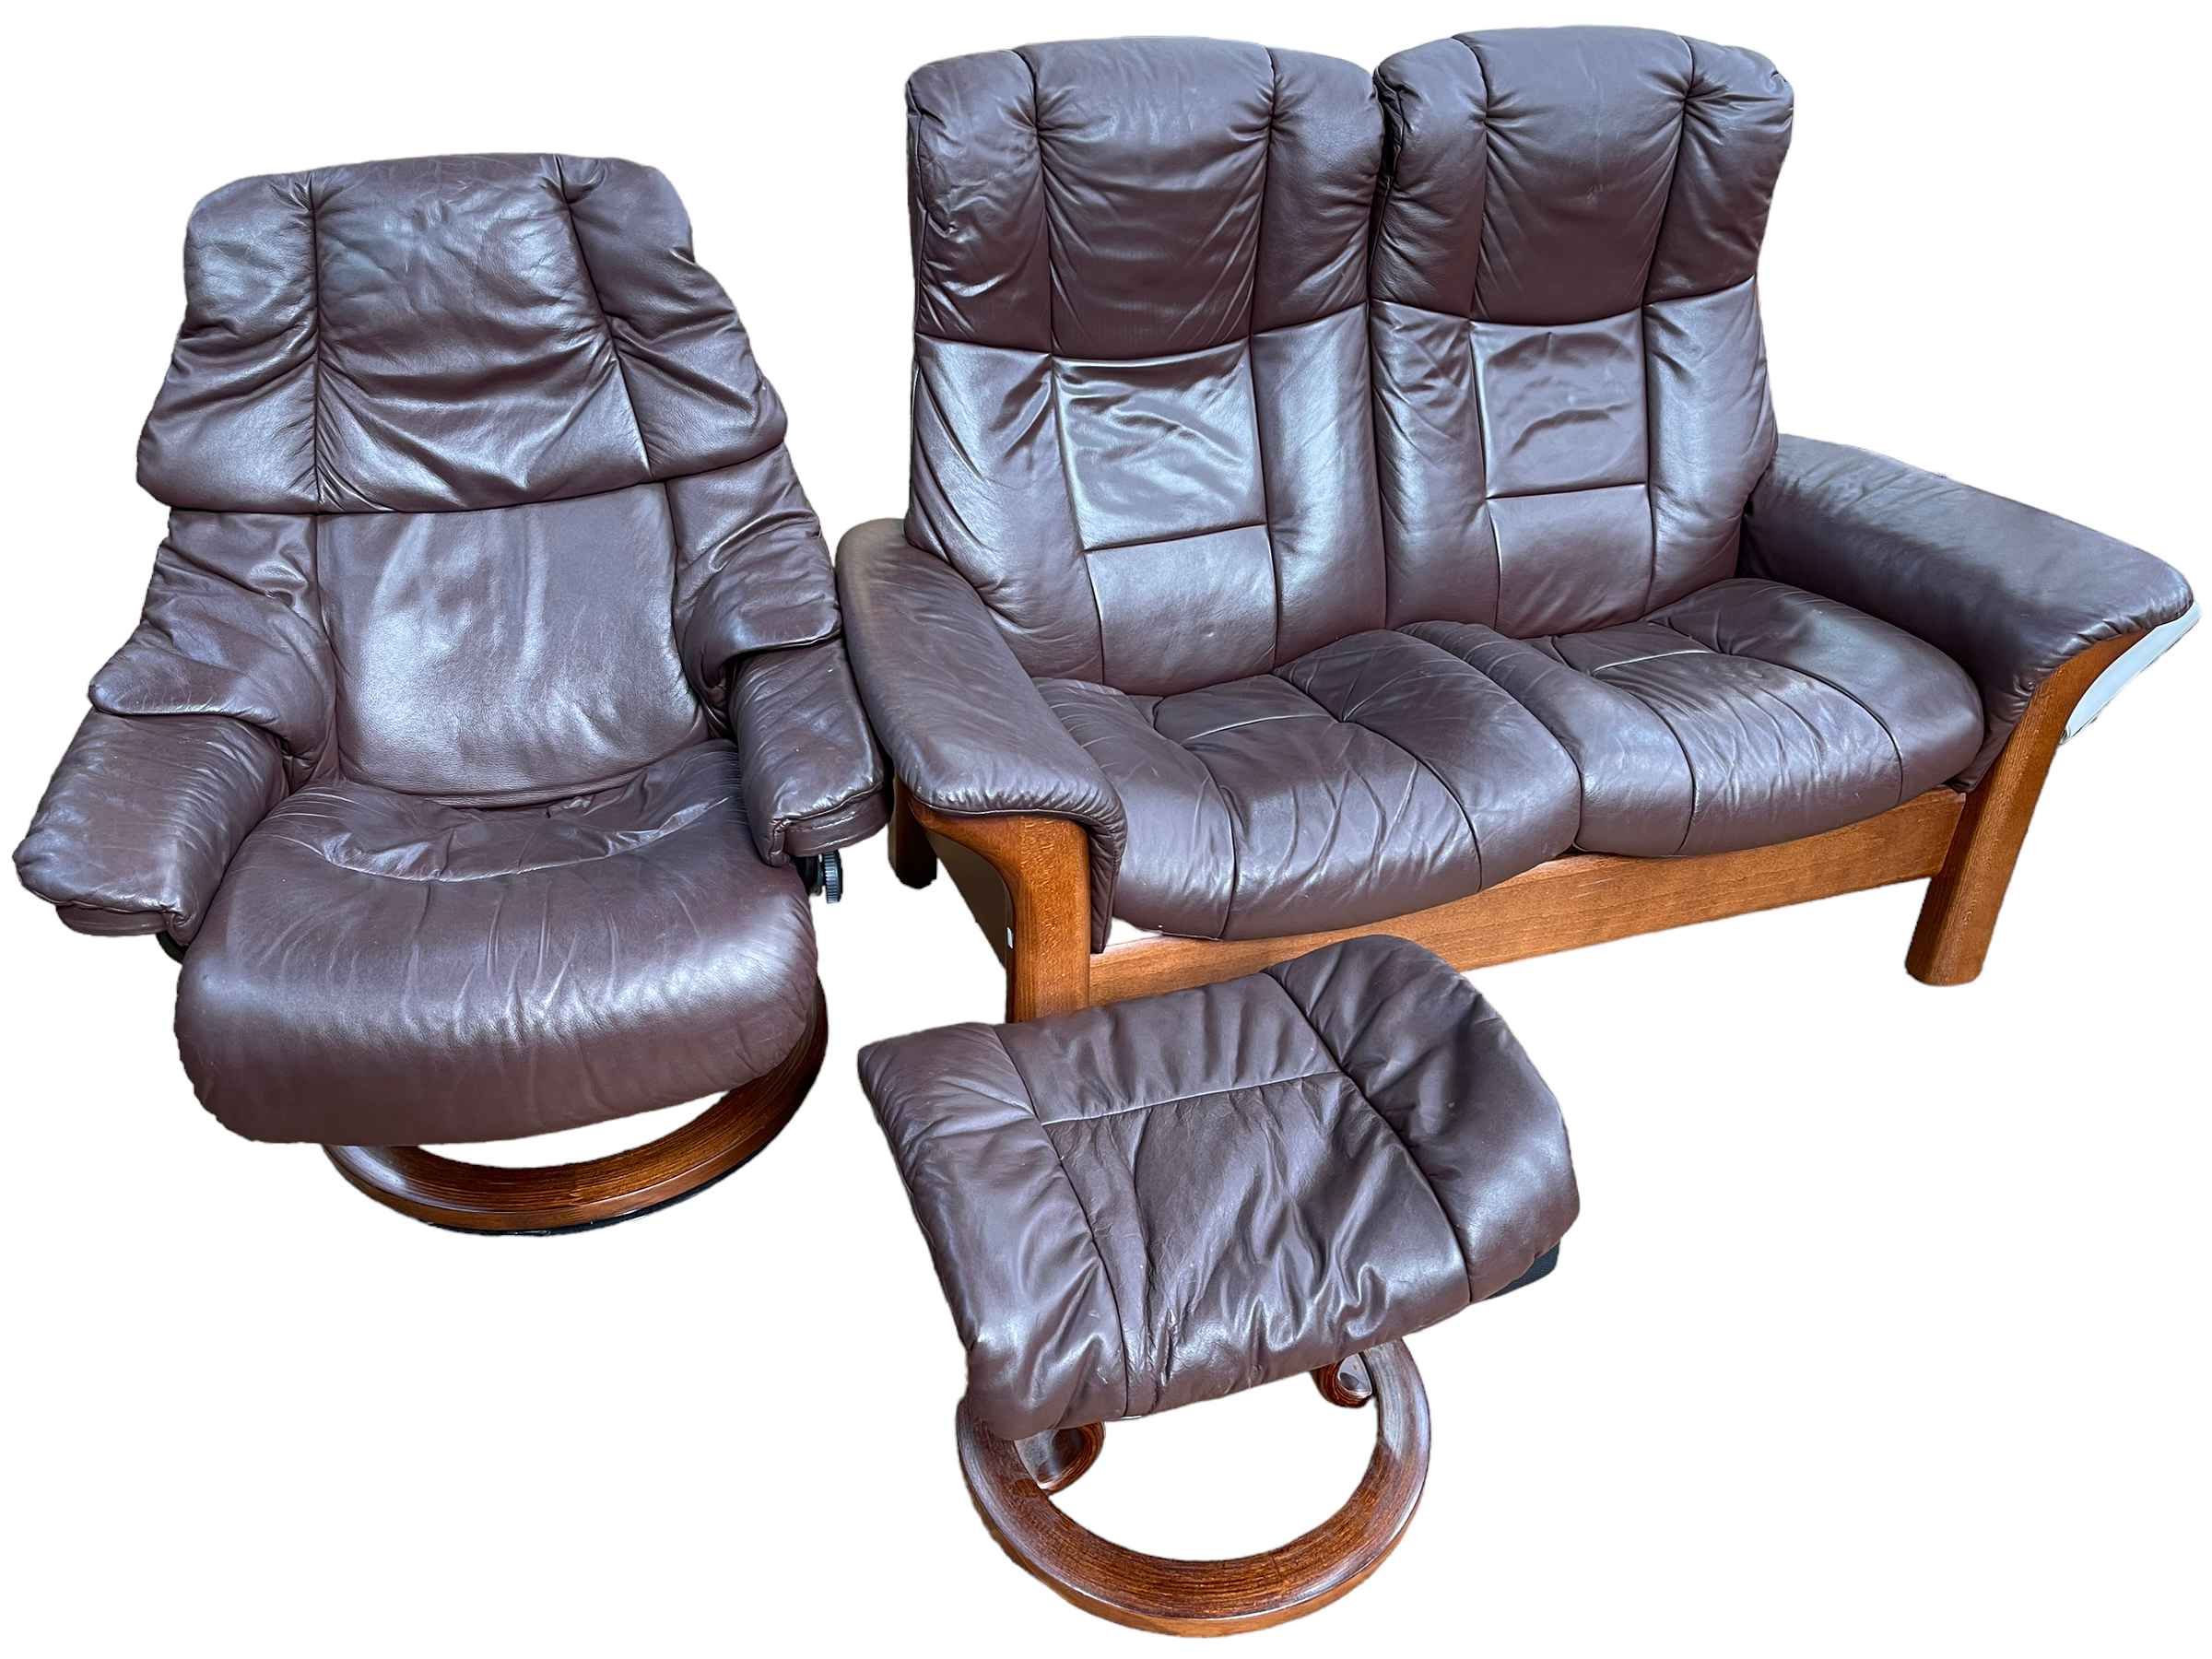 Stressless chocolate brown leather two seater reclining settee, adjustable chair and footstool.